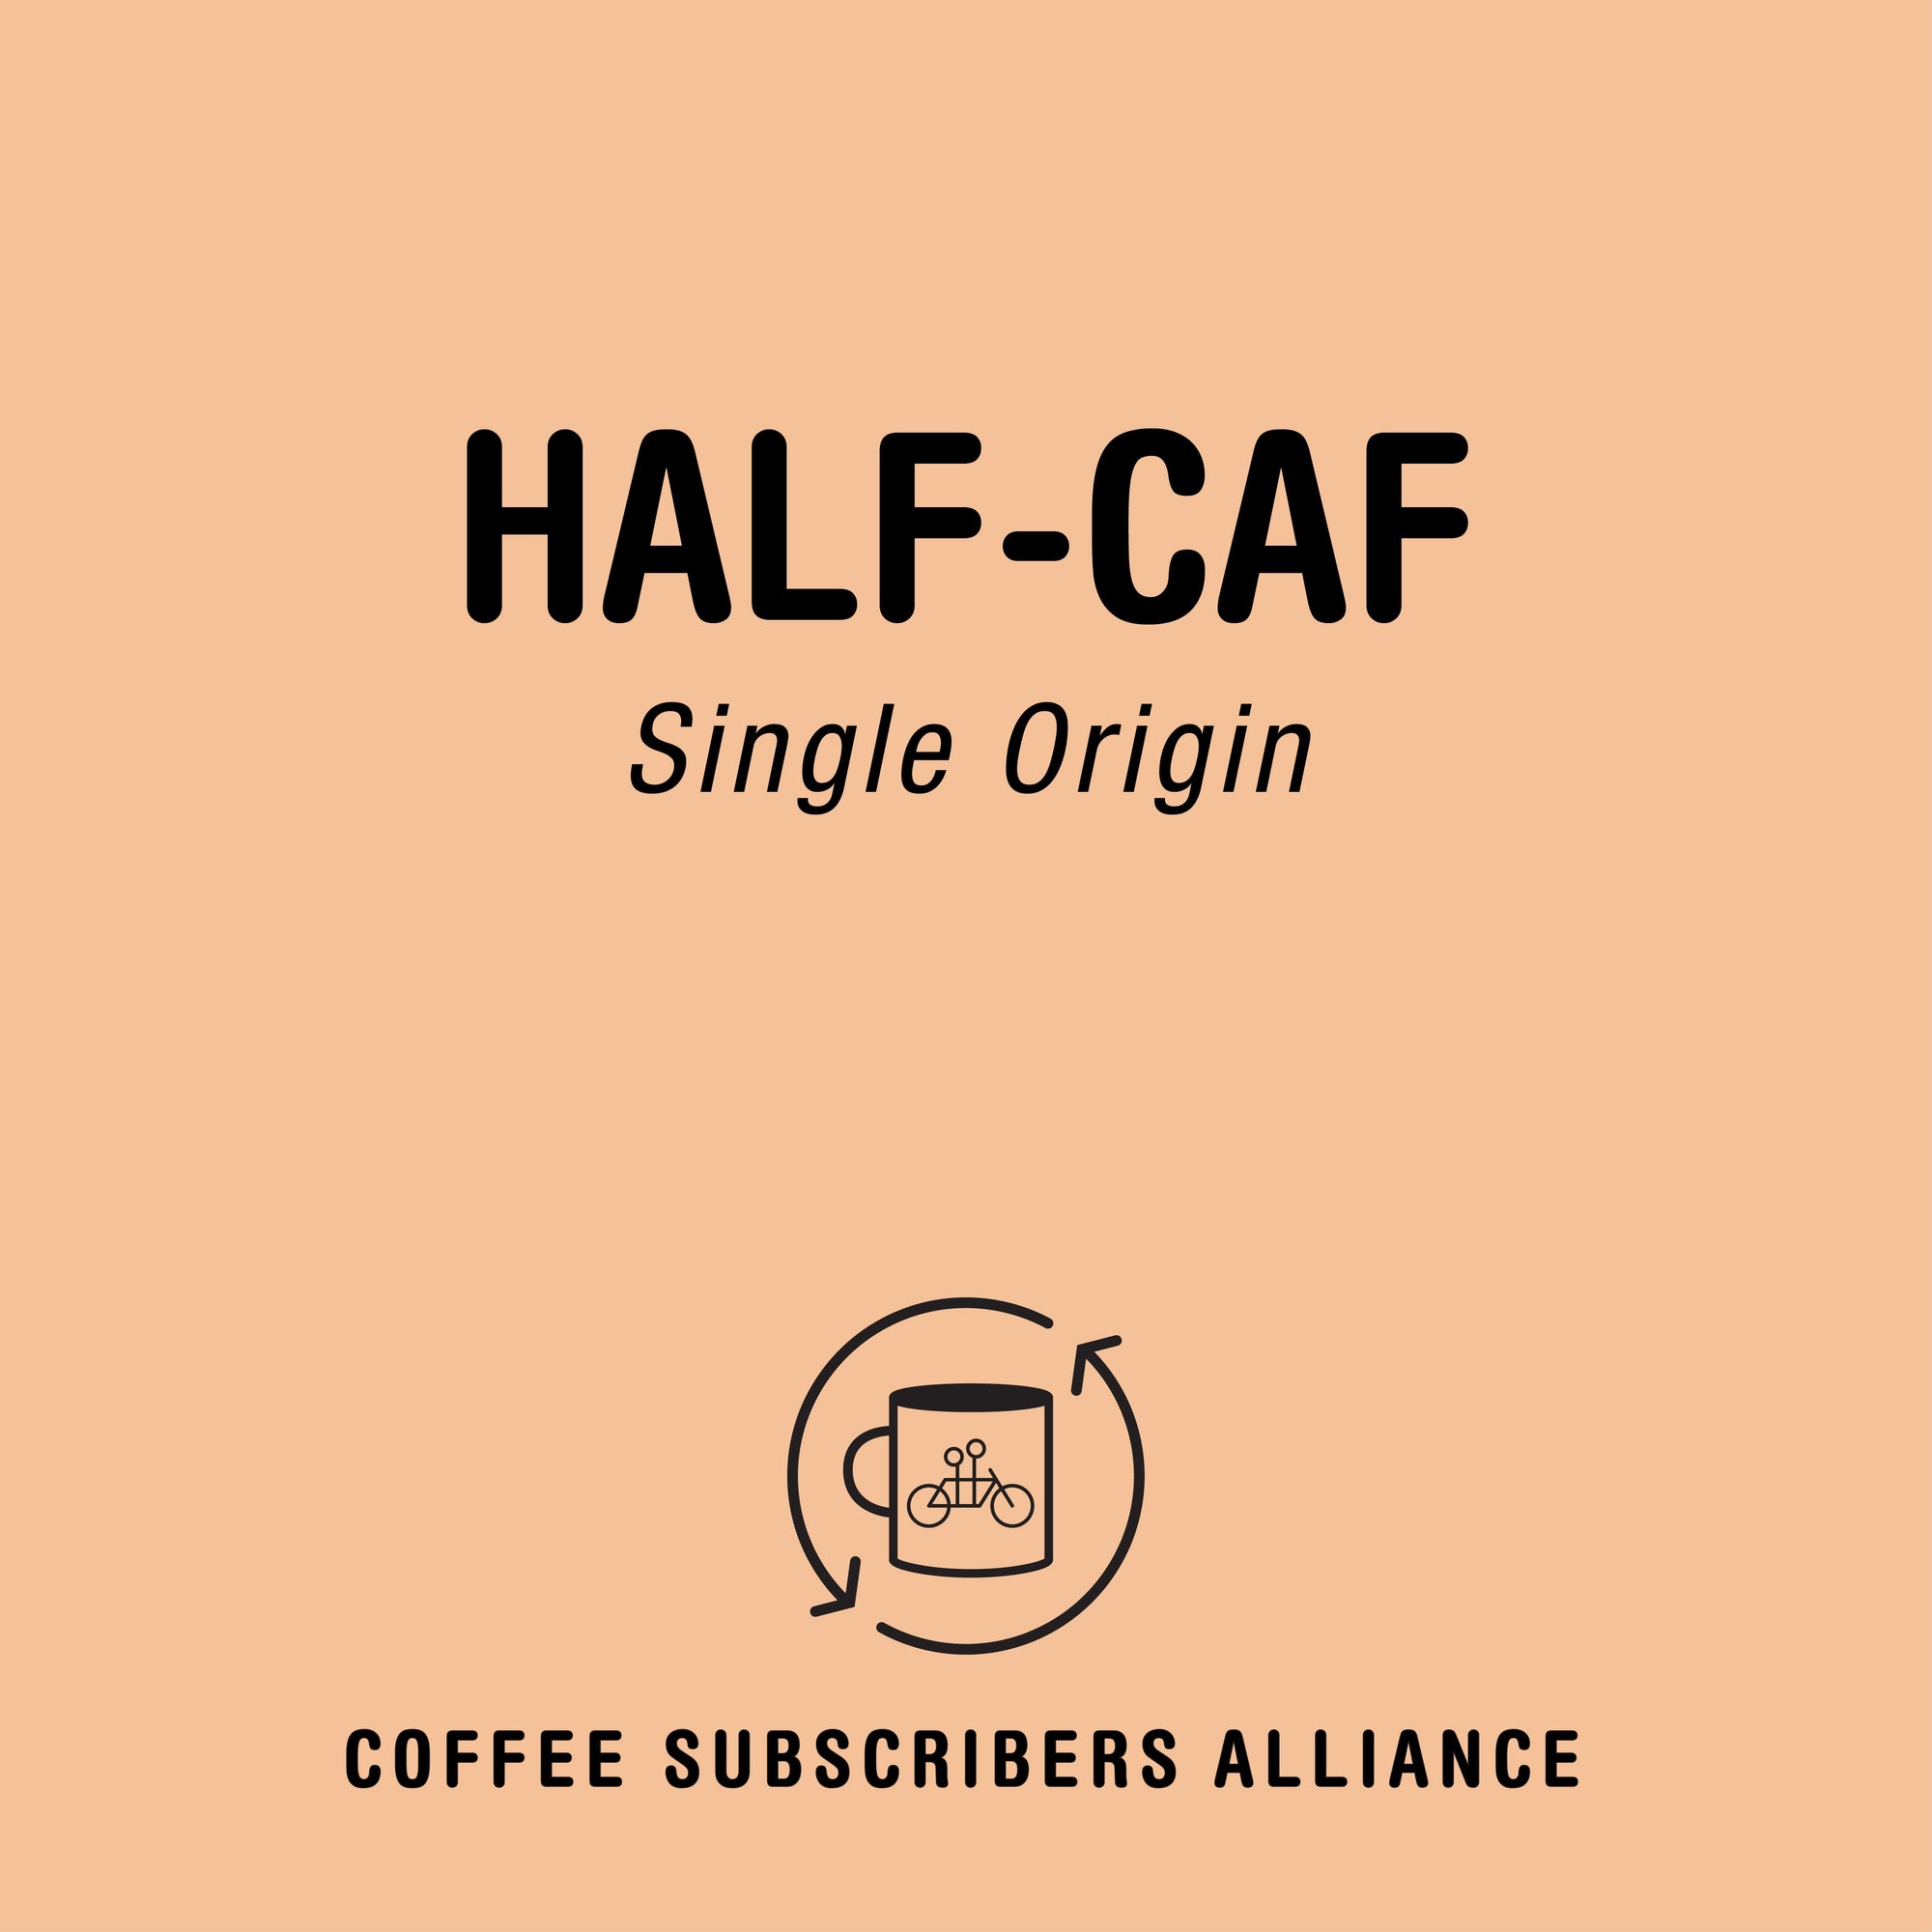 A minimalistic Half-Caf Subscription Gift 1 Week x 12-themed graphic with the text "half-caf single origin drip" at the top and a logo for "coffee subscription alliance" featuring a coffee cup with steam at the bottom, set - by Tandem.